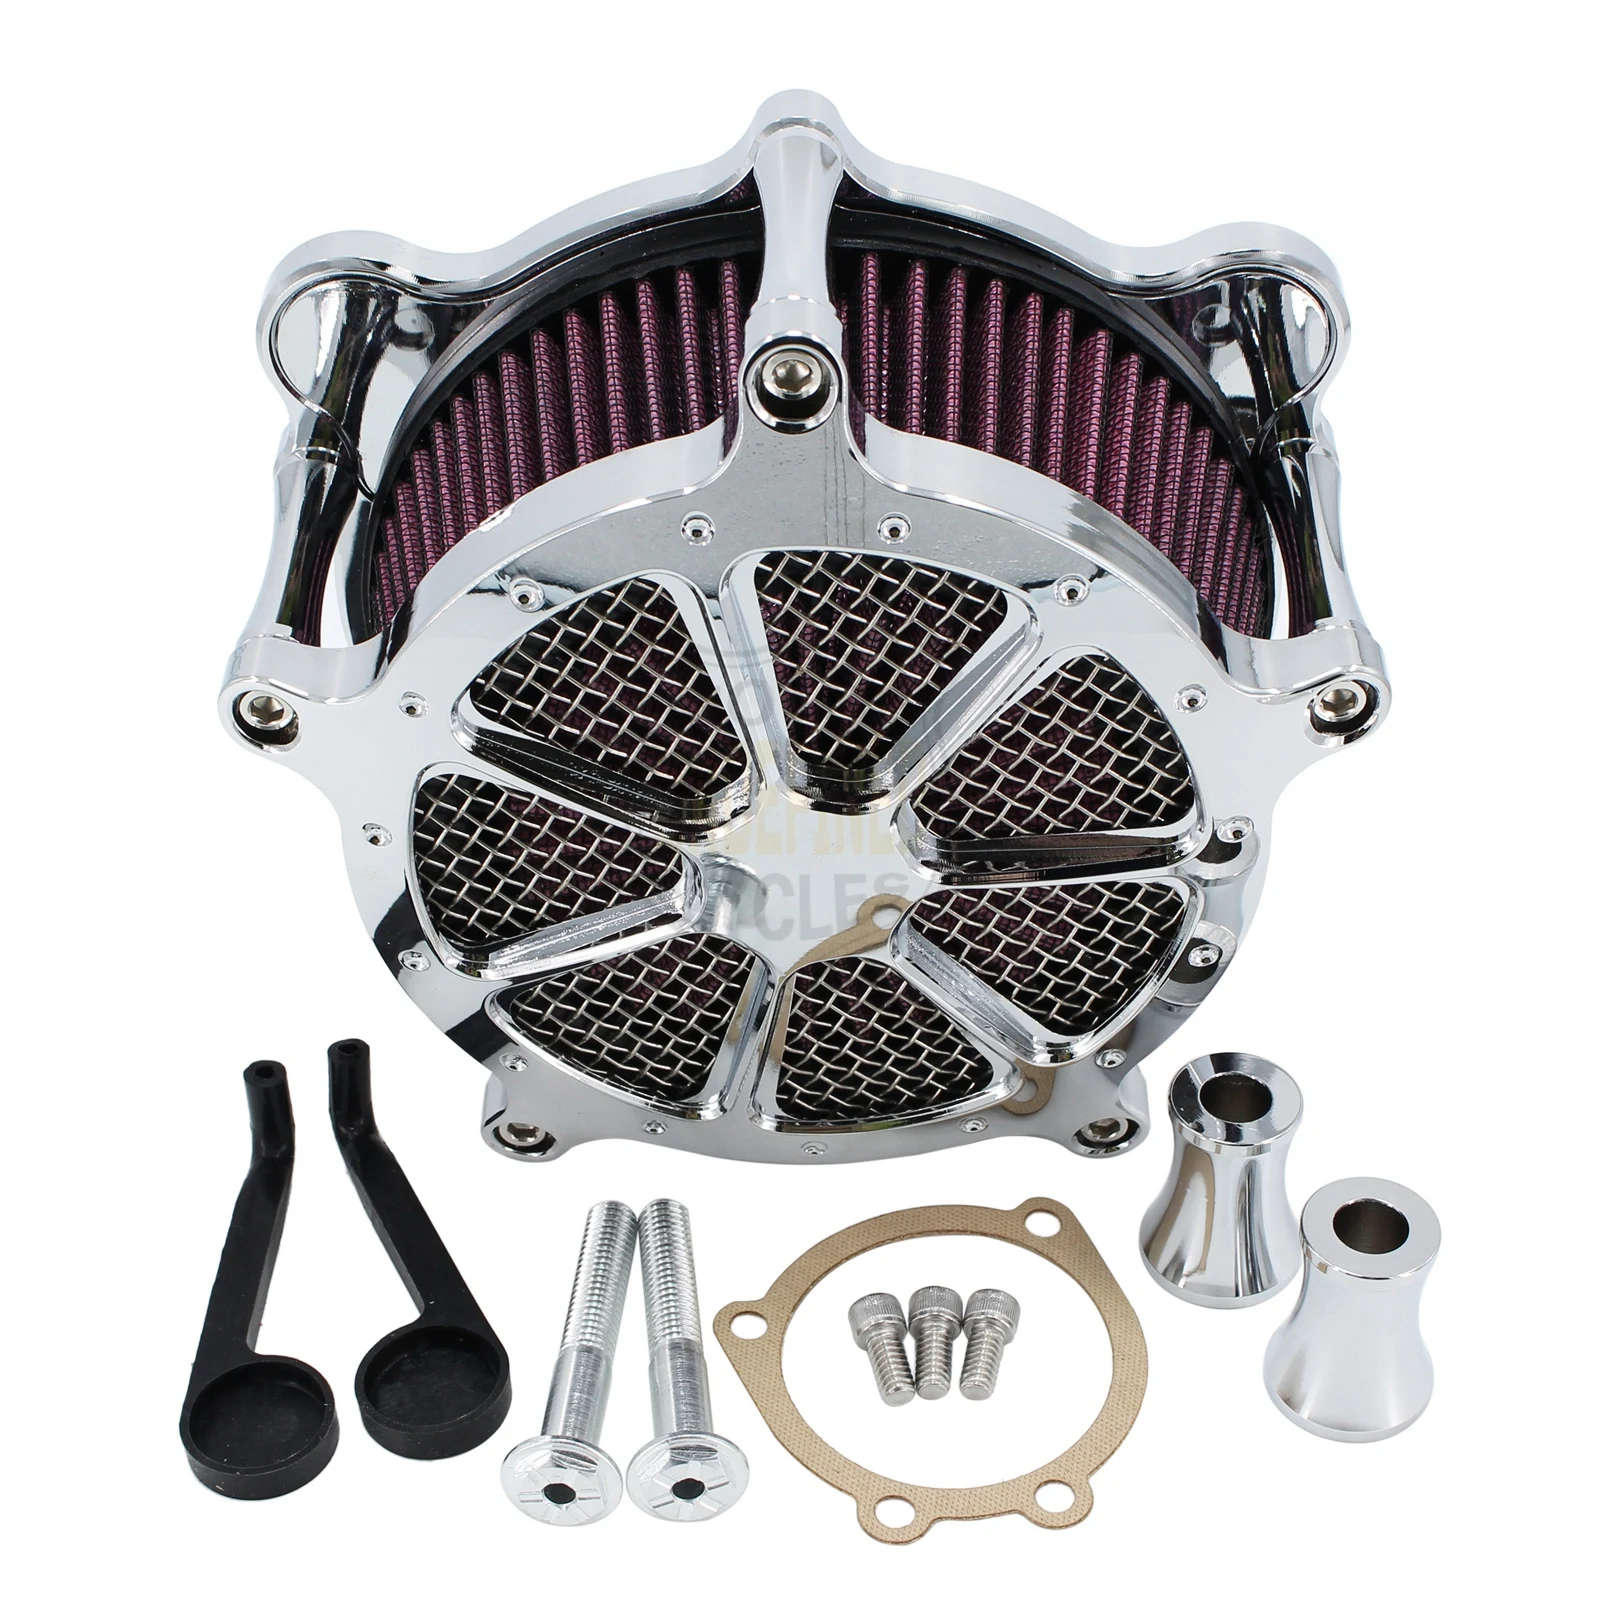 Chrome Air Cleaner Intake Filter System Kit Contrast Cut for Touring Road King Electra Glide Road Glide Street Glide Softail Dyna FXR 